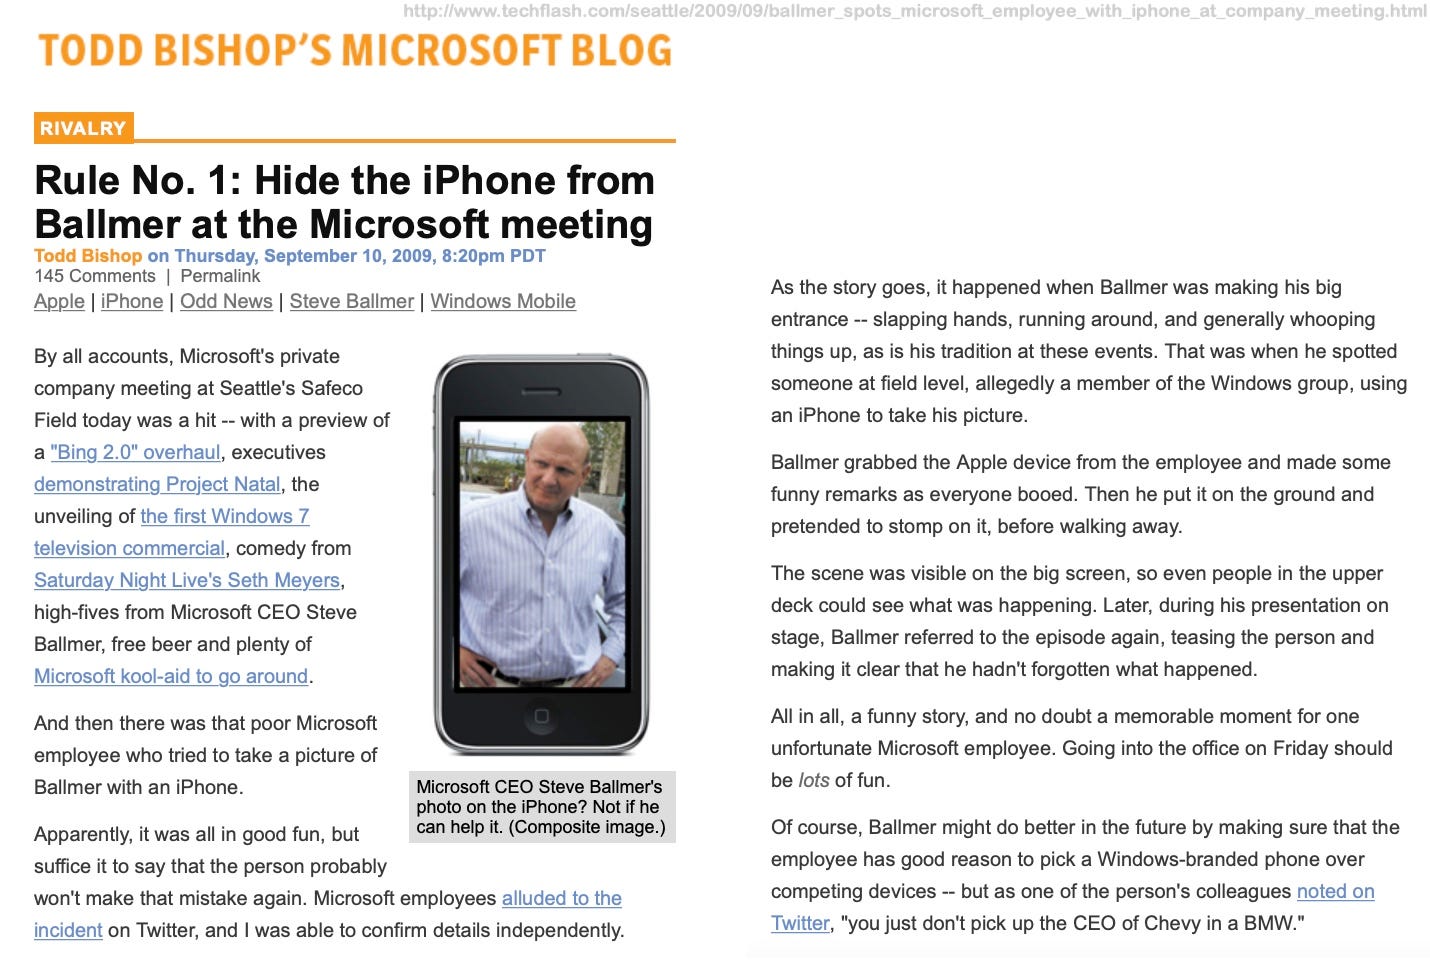 TODD BISHOP'S MICROSOFT BLOG RIVALRY Rule No. 1: Hide the iPhone from Ballmer at the Microsoft meeting Todd Bishop on Thursday, September 10, 2009, 8:20pm PDT 145 Comments | Permalink Apple | iPhone | Odd News | Steve Ballmer | Windows Mobile By all accounts, Microsoft's private company meeting at Seattle's Safeco Field today was a hit -- with a preview of a "Bing 2.0" overhaul, executives demonstrating Project Natal, the unveiling of the first Windows 7 television commercial, comedy from Saturday Night Live's Seth Meyers, high-fives from Microsoft CEO Steve Ballmer, free beer and plenty of Microsoft kool-aid to go around. And then there was that poor Microsoft employee who tried to take a picture of Ballmer with an iPhone. Microsoft CEO Steve Ballmer's photo on the iPhone? Not if he can help it. (Composite image.) Apparently, it was all in good fun, but suffice it to say that the person probably won't make that mistake again. Microsoft employees alluded to the incident on Twitter, and I was able to confirm details independently. As the story goes, it happened when Ballmer was making his big entrance - slapping hands, running around, and generally whooping things up, as is his tradition at these events. That was when he spotted someone at field level, allegedly a member of the Windows group, using an iPhone to take his picture. Ballmer grabbed the Apple device from the employee and made some funny remarks as everyone booed. Then he put it on the ground and pretended to stomp on it, before walking away. The scene was visible on the big screen, so even people in the upper deck could see what was happening. Later, during his presentation on stage, Ballmer referred to the episode again, teasing the person and making it clear that he hadn't forgotten what happened. All in all, a funny story, and no doubt a memorable moment for one unfortunate Microsoft employee. Going into the office on Friday should be lots of fun. Of course, Ballmer might do better in the future by making sure that the employee has good reason to pick a Windows-branded phone over competing devices - but as one of the person's colleagues noted on Twitter, "you just don't pick up the CEO of Chevy in a BMW."